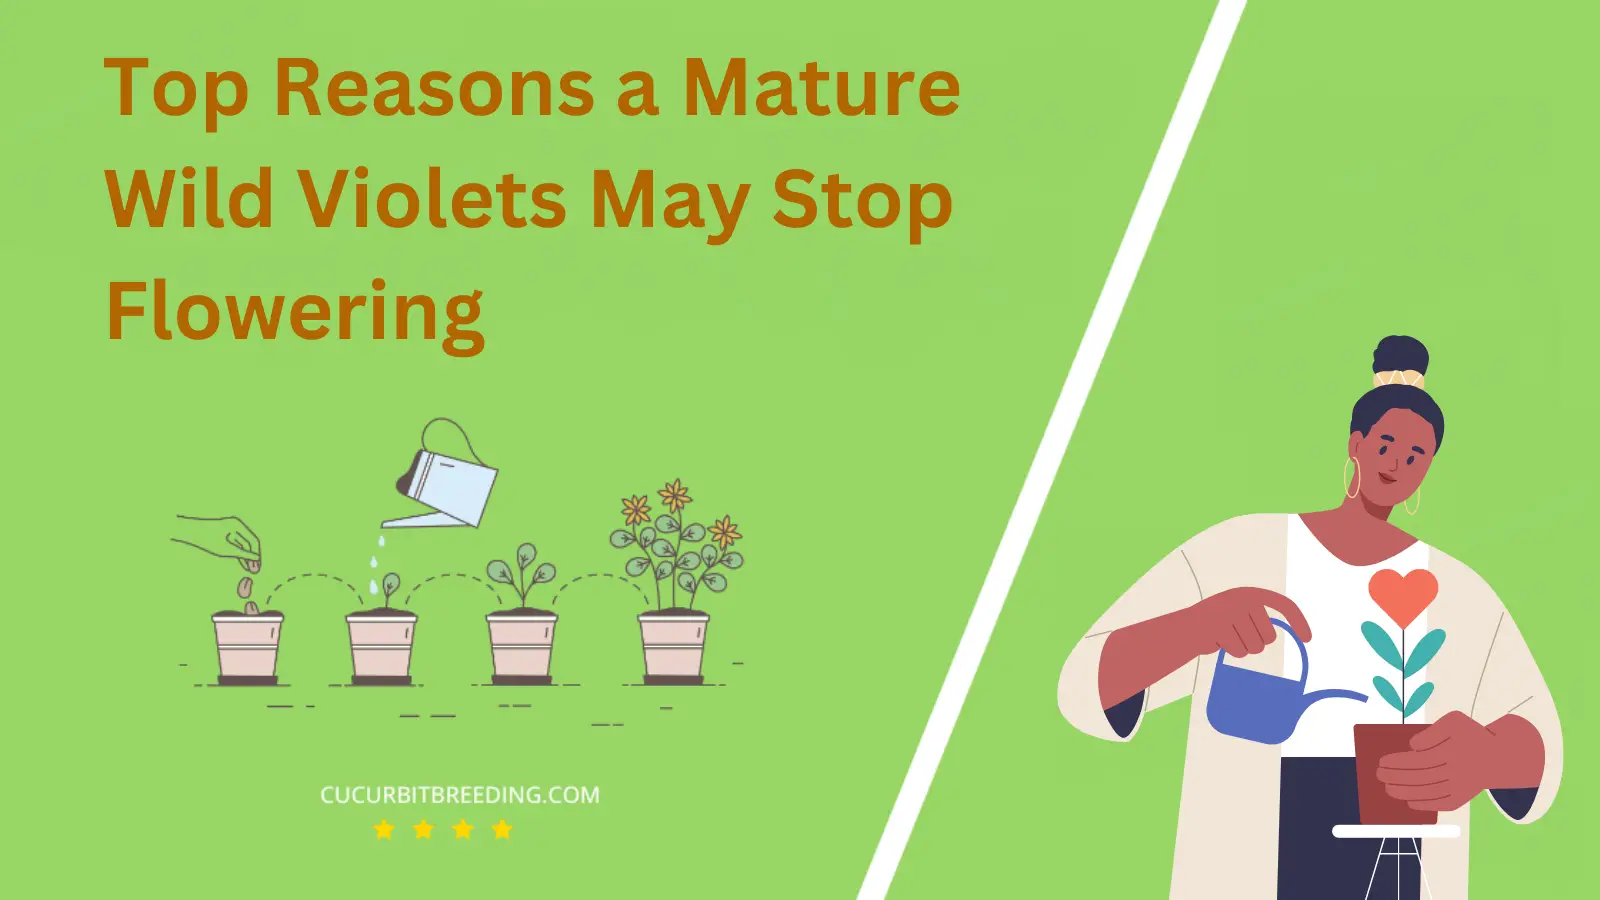 Top Reasons a Mature Wild Violets May Stop Flowering